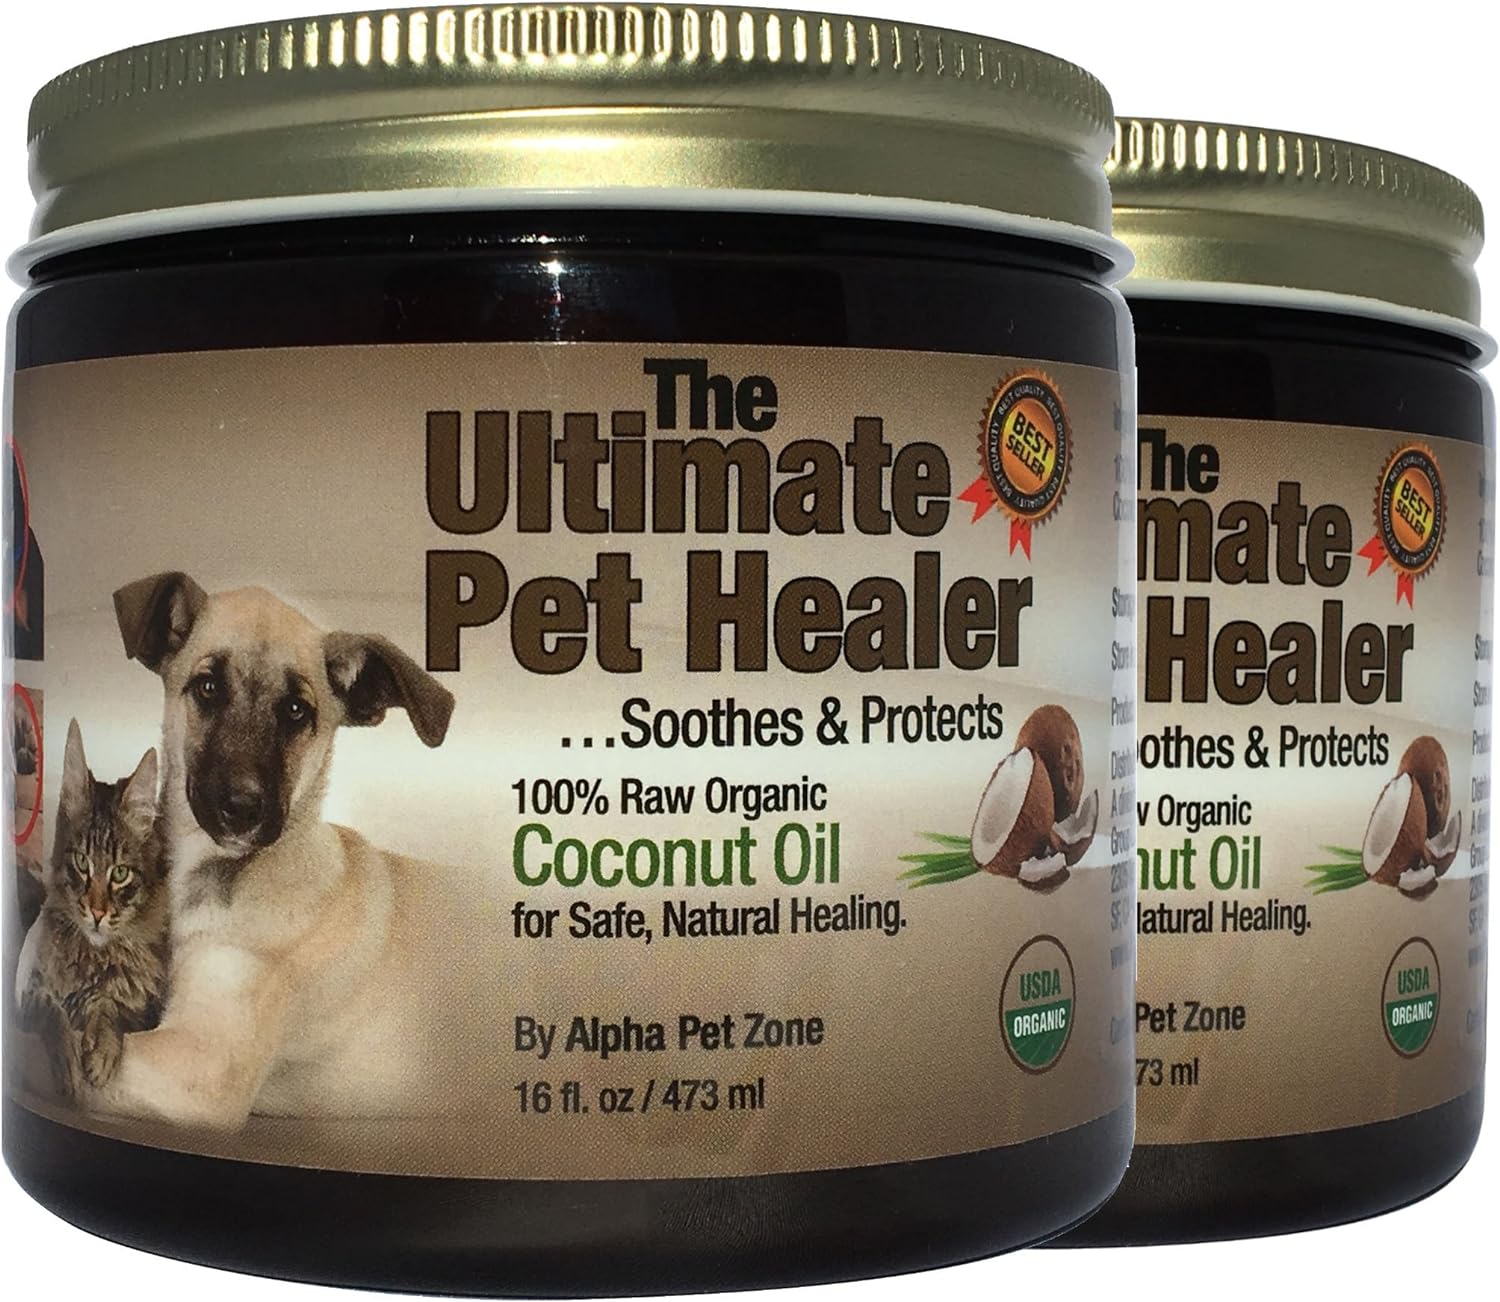 Organic Coconut Oil for Dogs & Cats Skin and Coat, 32 oz, Natural Treatment for Itchy Skin, Dry Elbows, Paws & Nose